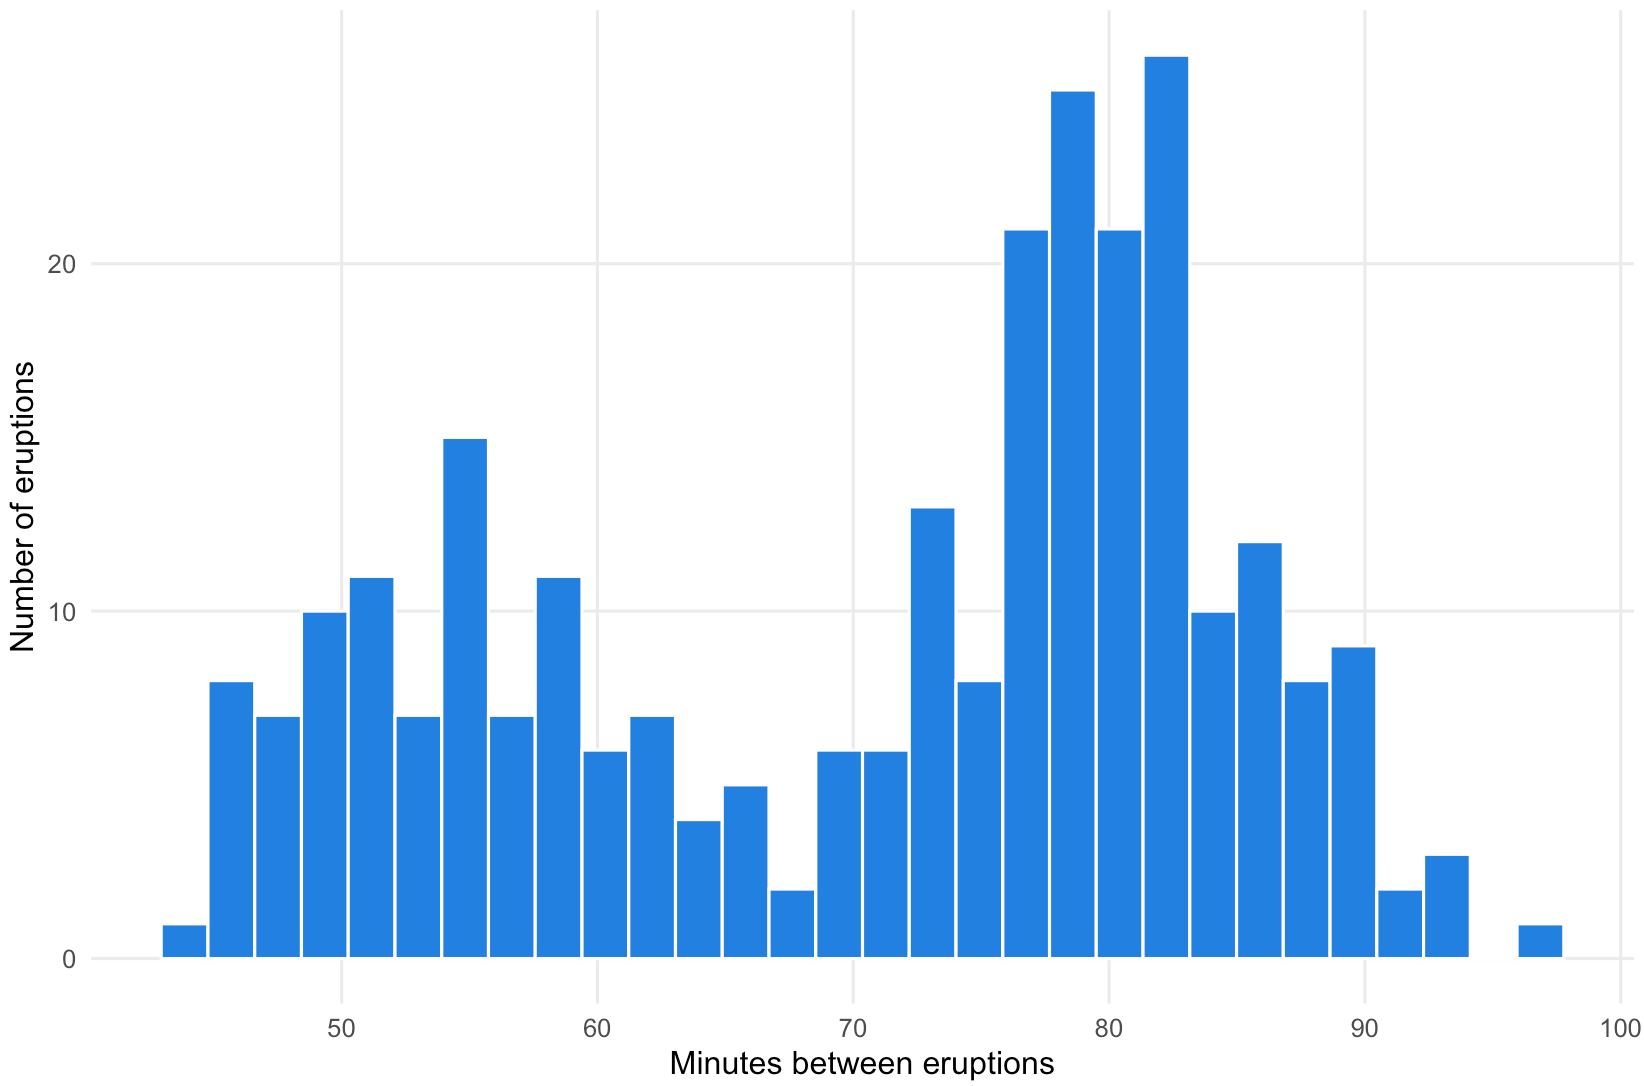 A histogram of the minutes between eruption of Old Faithfull, with 'Number of eruptions' on the y axis